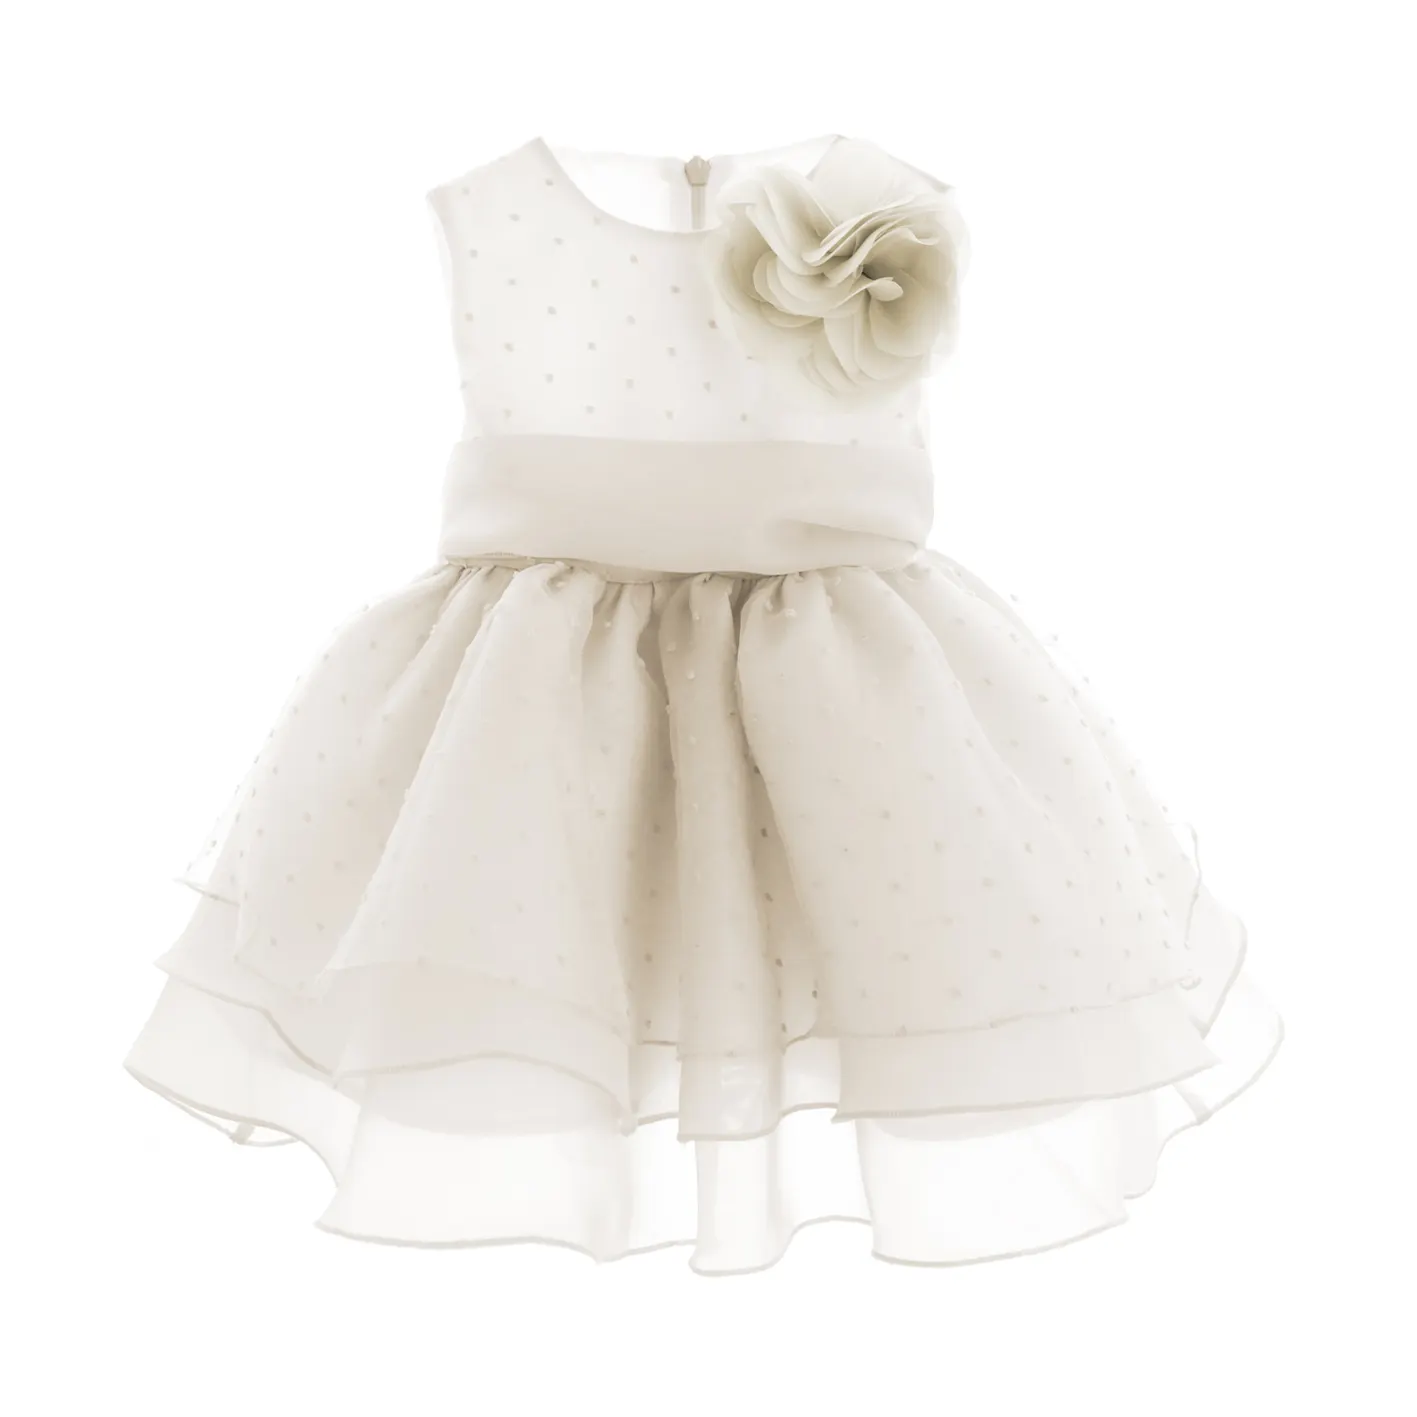 Made in Italy high quality summer baby elegant dress with tulle ALLEGRA for retail art A1110A 2 ivory